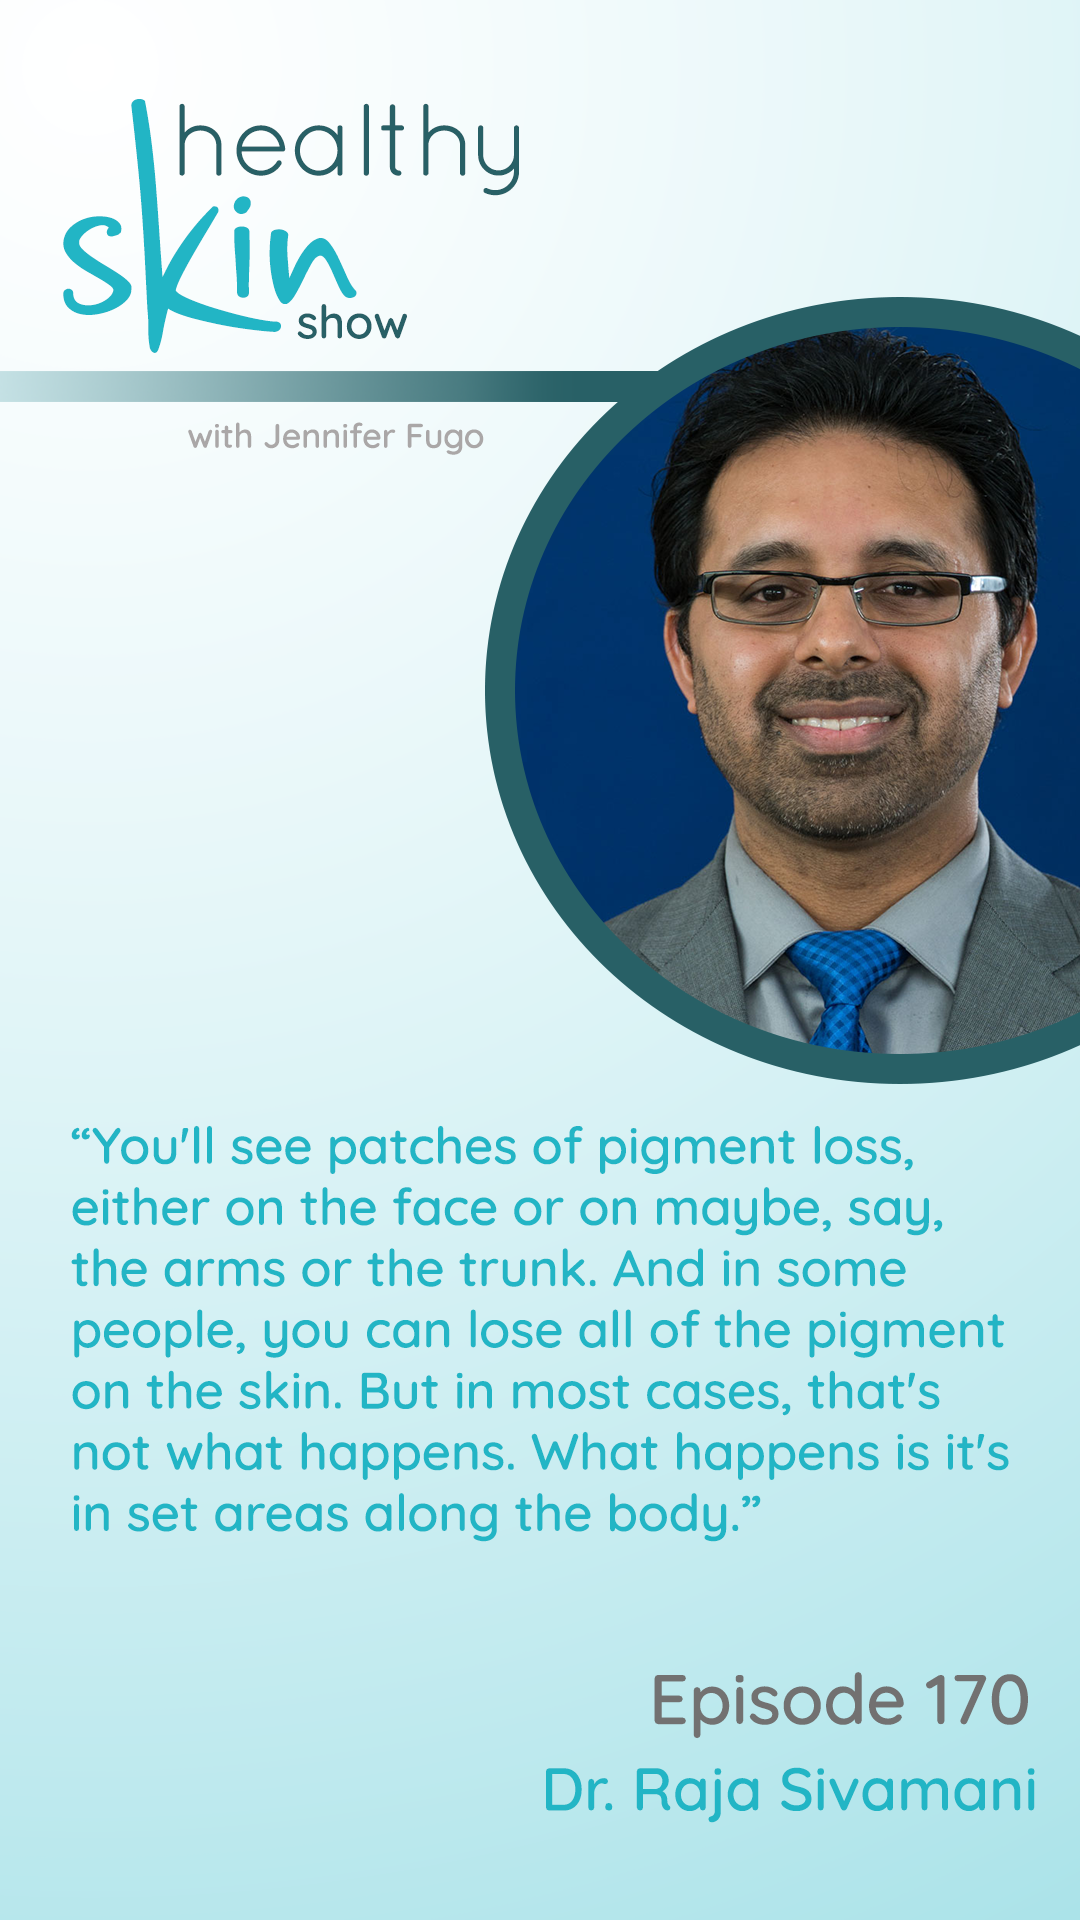 “You'll see patches of pigment loss, either on the face or on maybe, say, the arms or the trunk. And in some people, you can lose all of the pigment on the skin. But in most cases, that's not what happens. What happens is it's in set areas along the body.”